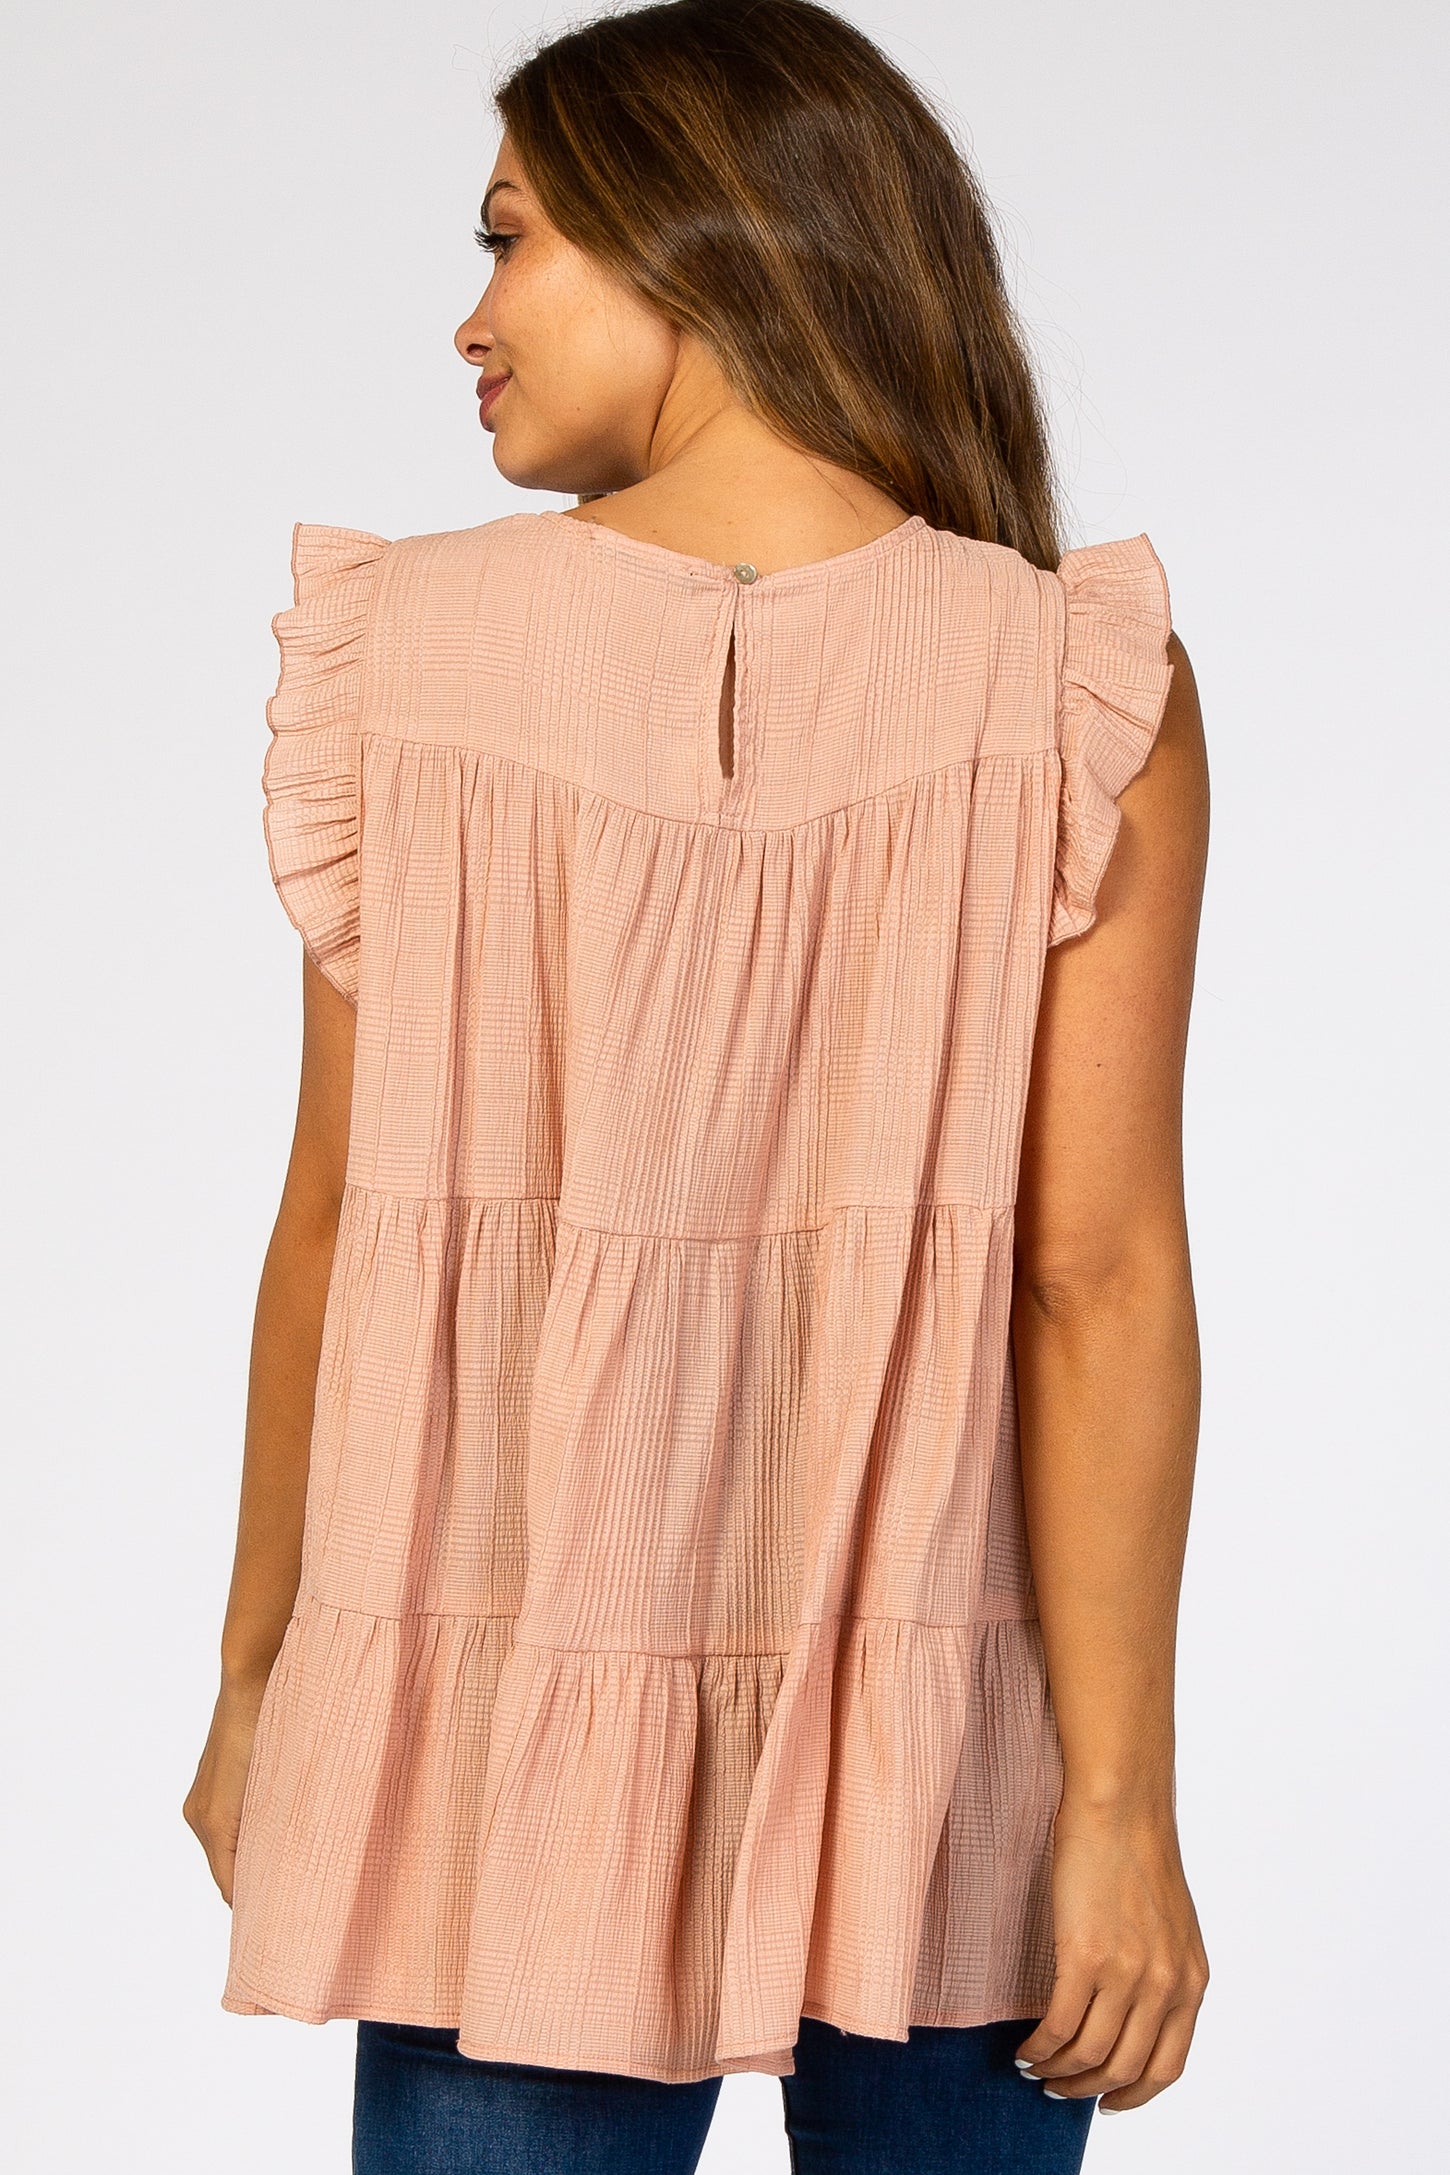 Peach Textured Tiered Maternity Blouse